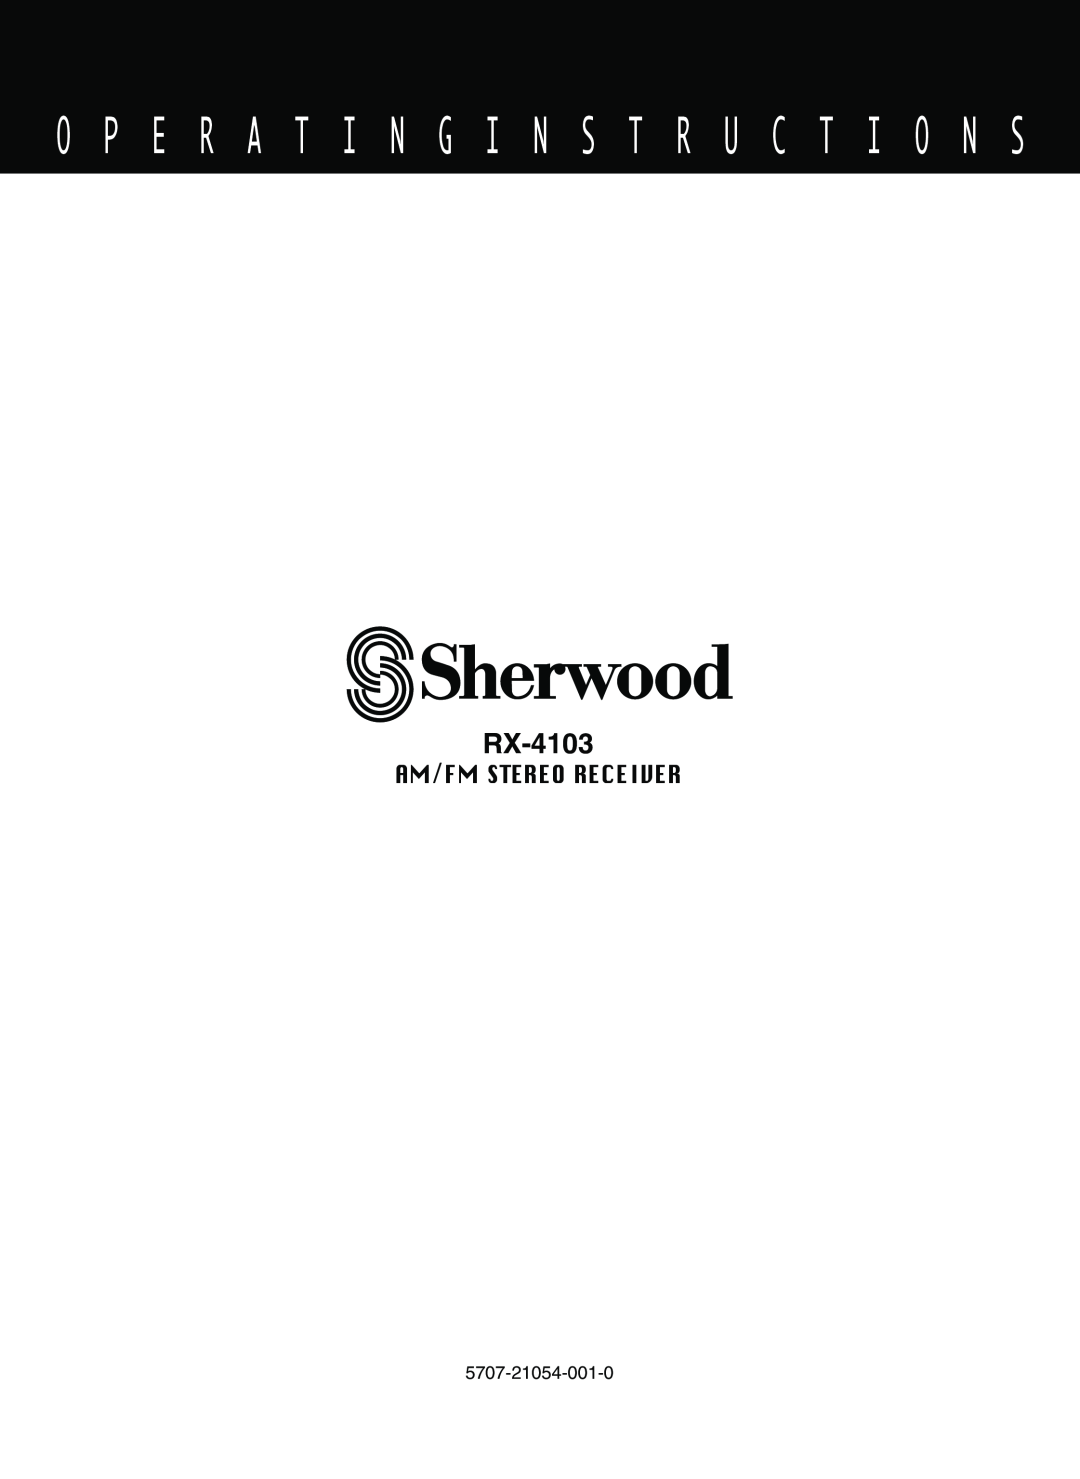 Sherwood RX-4103 manual O P E R A T I N G I N S T R U C T I O N S, Am/Fm Stereo Receiver 